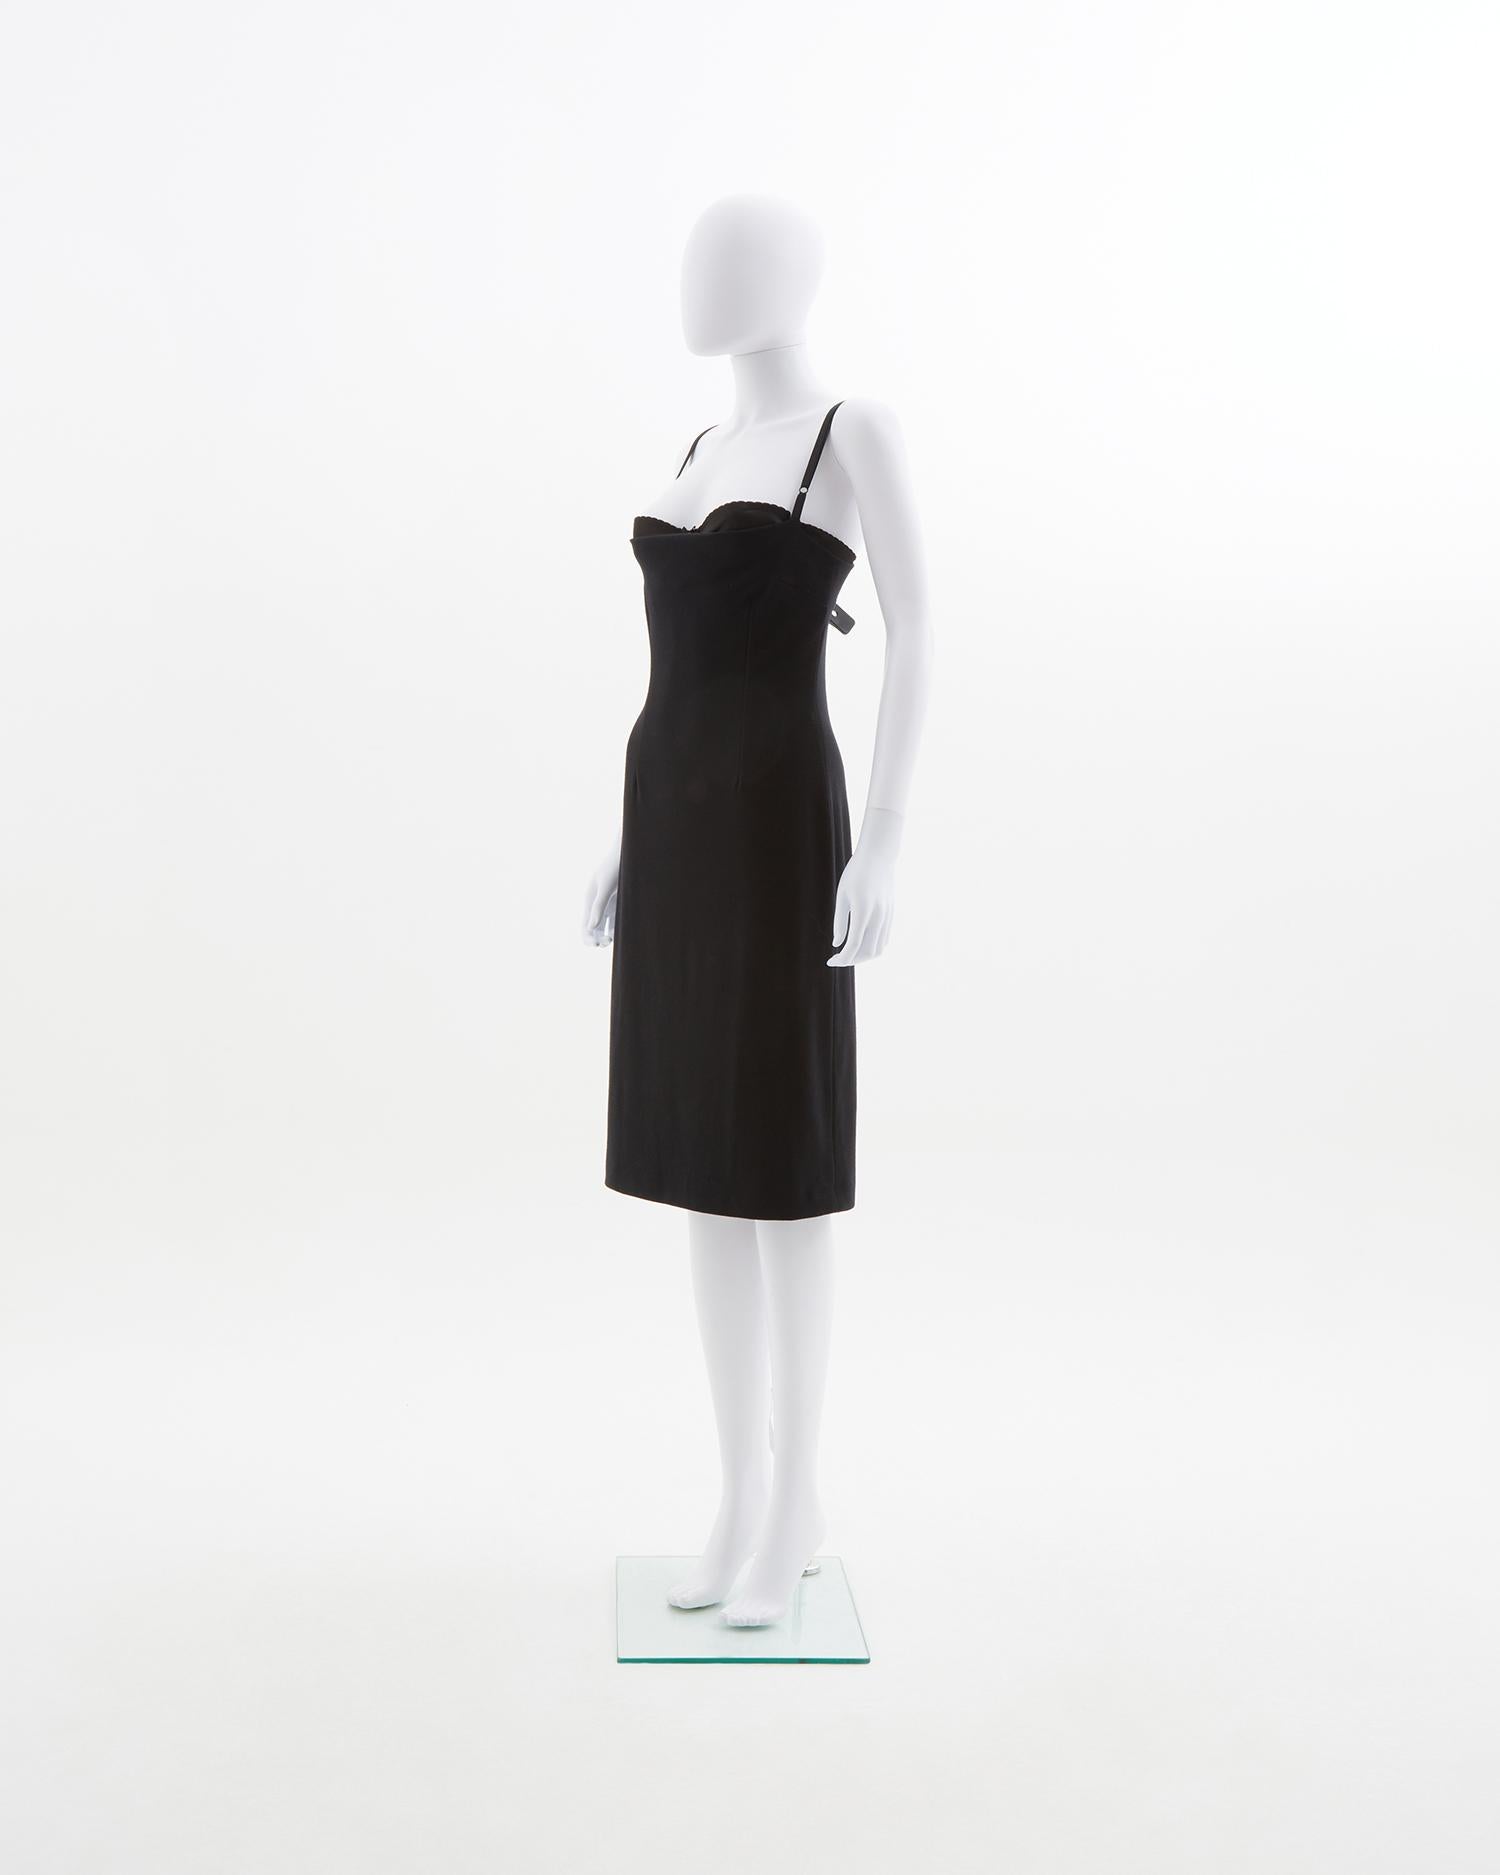 - Early 2000s
- Sold by Skof.Archive
- Above knee-length 
- Black stretch cocktail dress
- Adjustable straps 
- Square neckline 
- Internal lace and silk bra sewn in that playfully pokes out the top of the dress
- Fit to the body

Size : FR 38 - EN